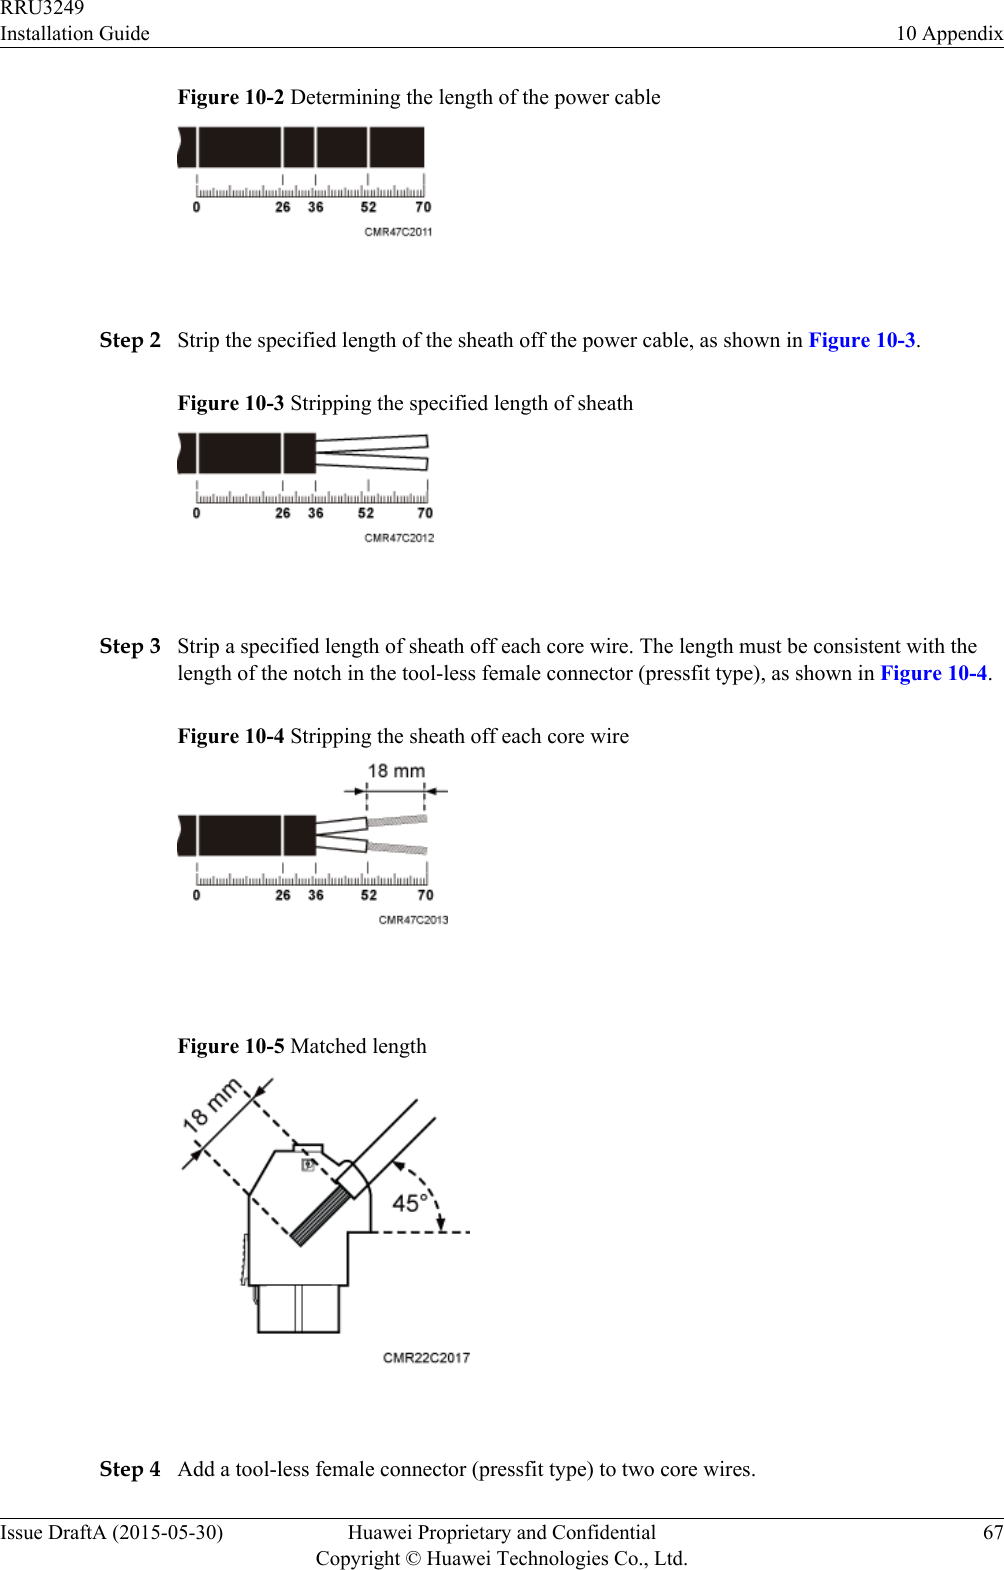 Figure 10-2 Determining the length of the power cable Step 2 Strip the specified length of the sheath off the power cable, as shown in Figure 10-3.Figure 10-3 Stripping the specified length of sheath Step 3 Strip a specified length of sheath off each core wire. The length must be consistent with thelength of the notch in the tool-less female connector (pressfit type), as shown in Figure 10-4.Figure 10-4 Stripping the sheath off each core wire Figure 10-5 Matched length Step 4 Add a tool-less female connector (pressfit type) to two core wires.RRU3249Installation Guide 10 AppendixIssue DraftA (2015-05-30) Huawei Proprietary and ConfidentialCopyright © Huawei Technologies Co., Ltd.67